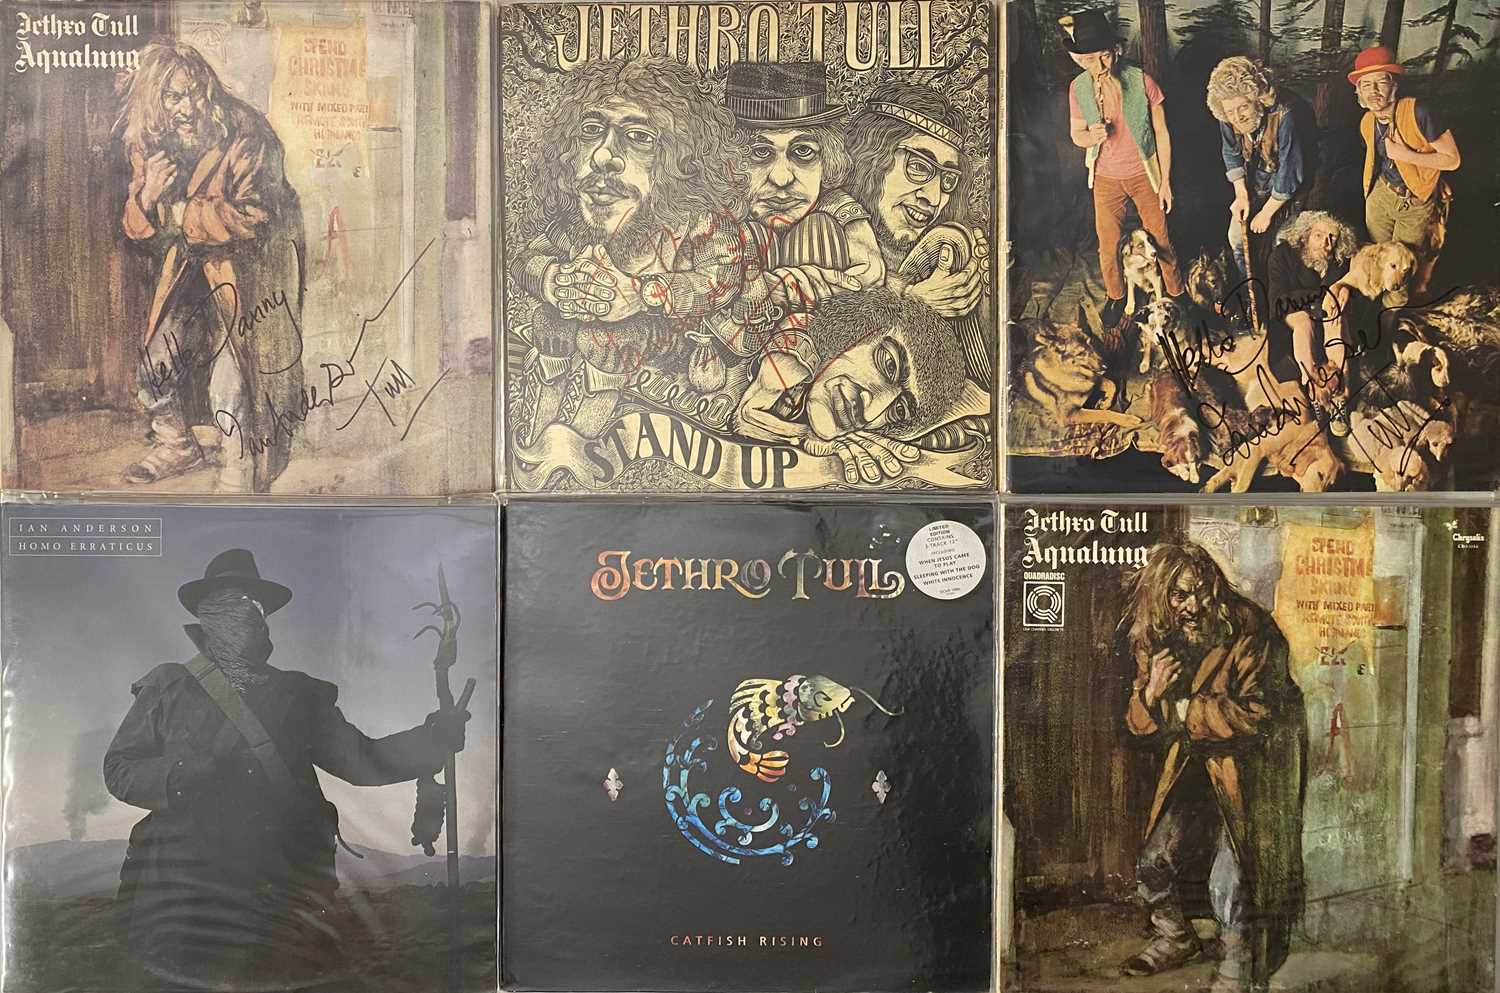 Lot 260 - JETHRO TULL - LP COLLECTION